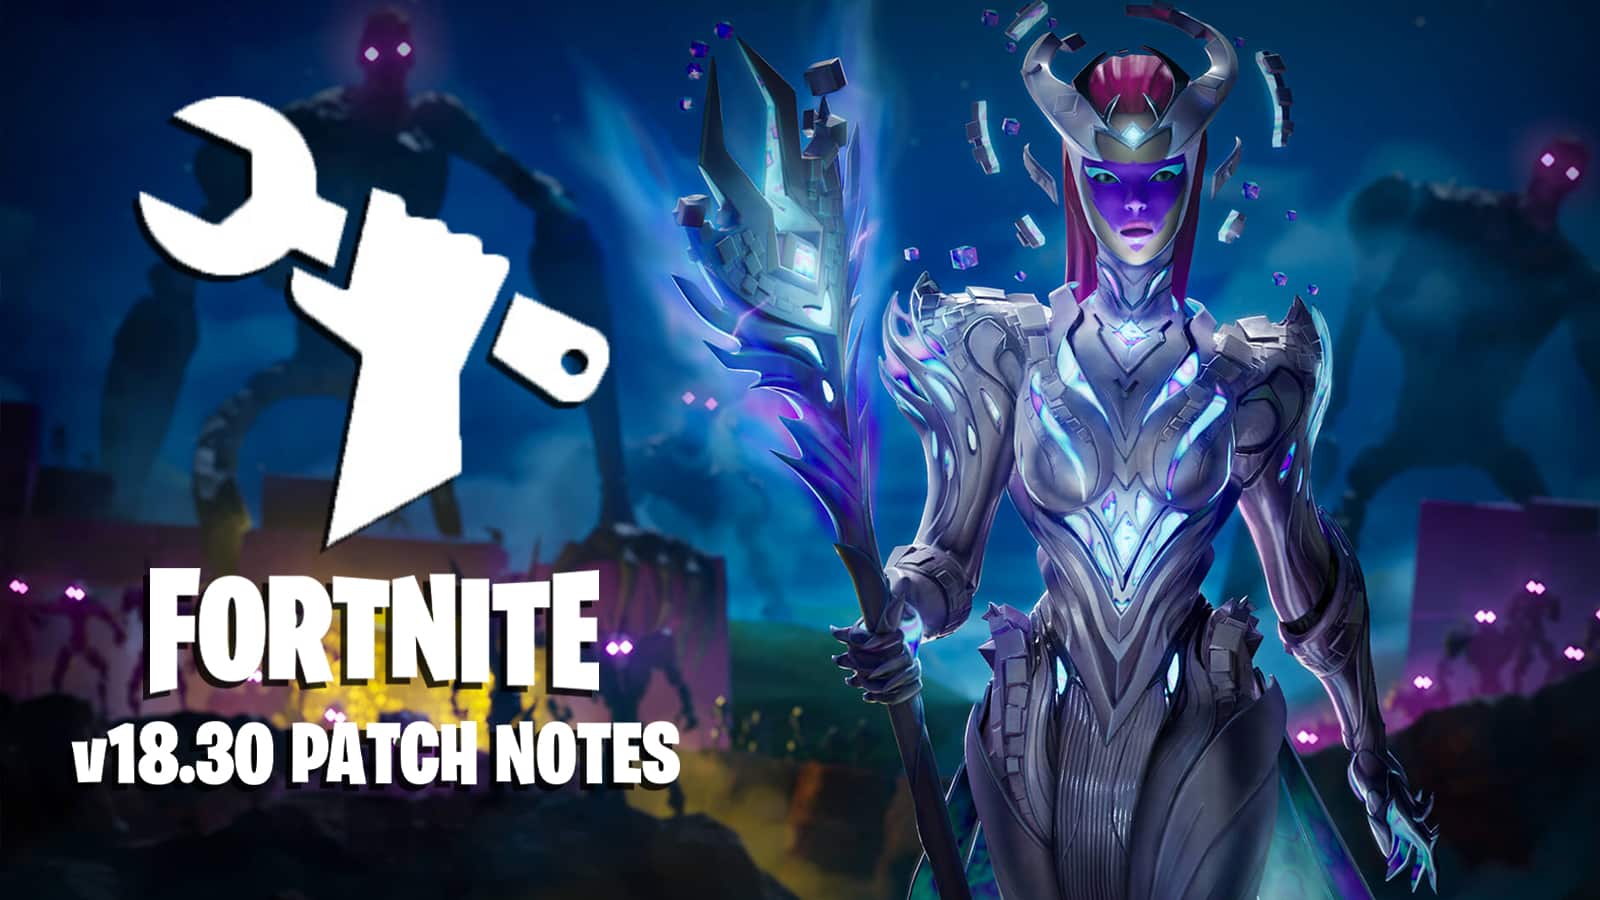 The Cube Queen in Fortnite alongside text reading '18.30 patch notes'